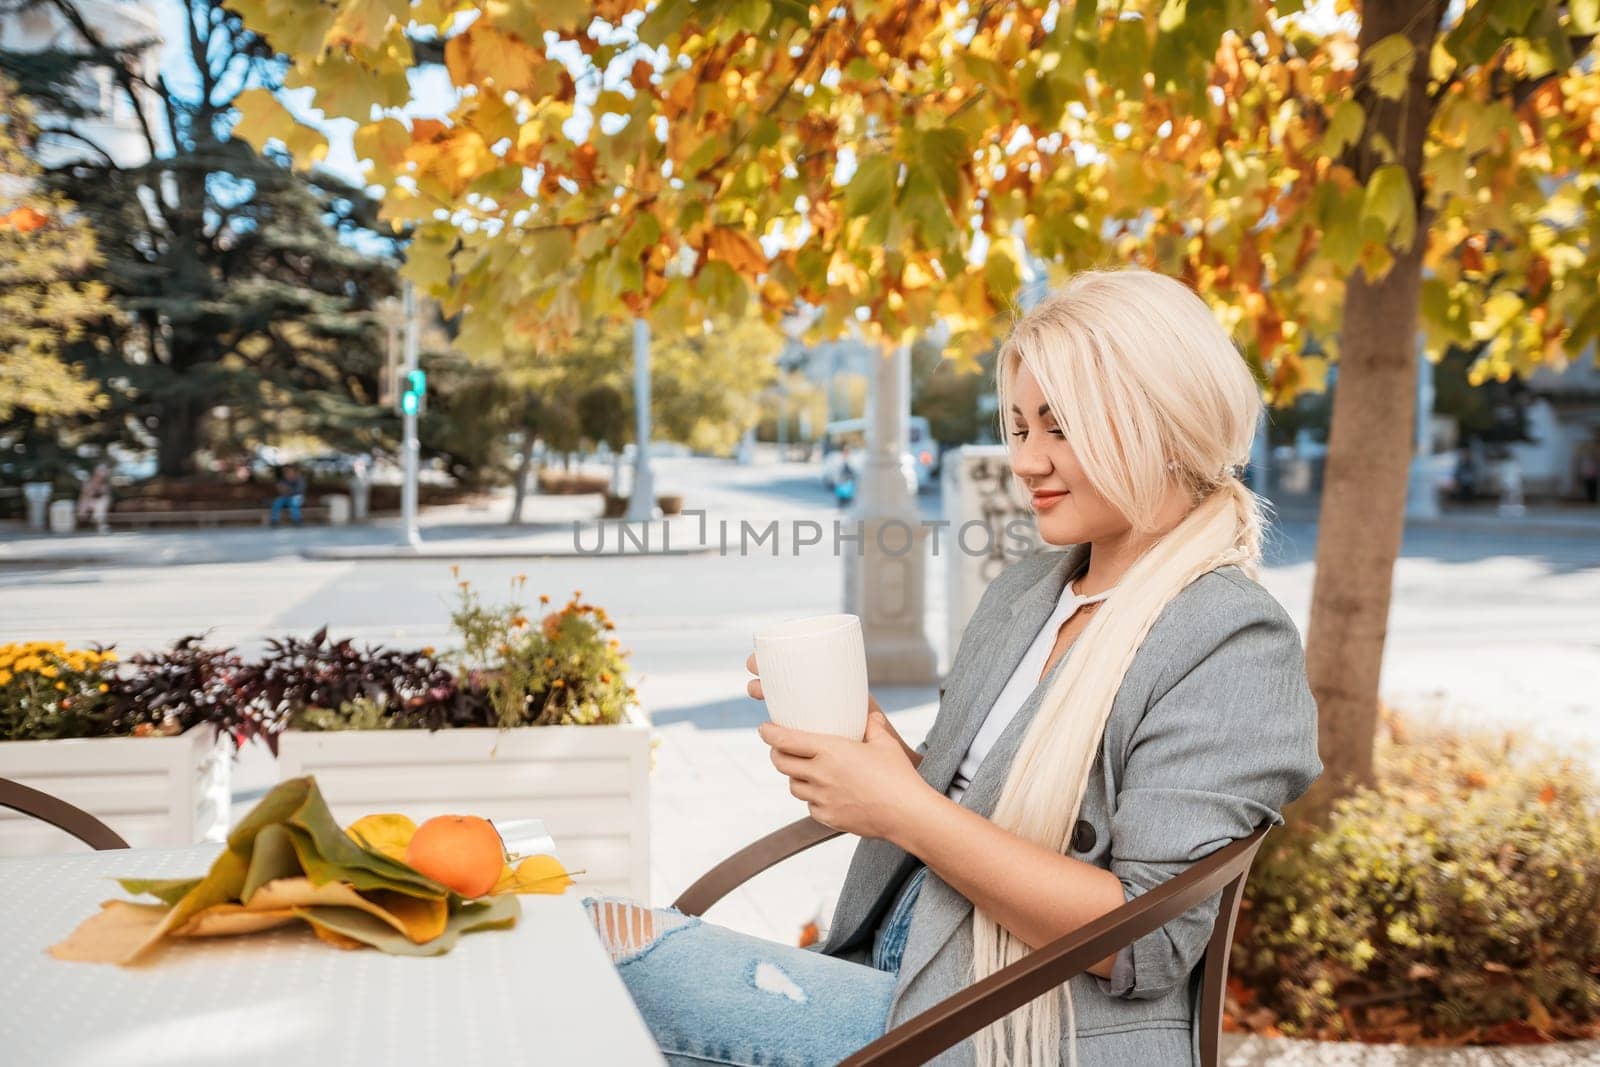 A blonde woman is sitting at a table with a cup of coffee and a plate of fruit. She is smiling and enjoying her time outside